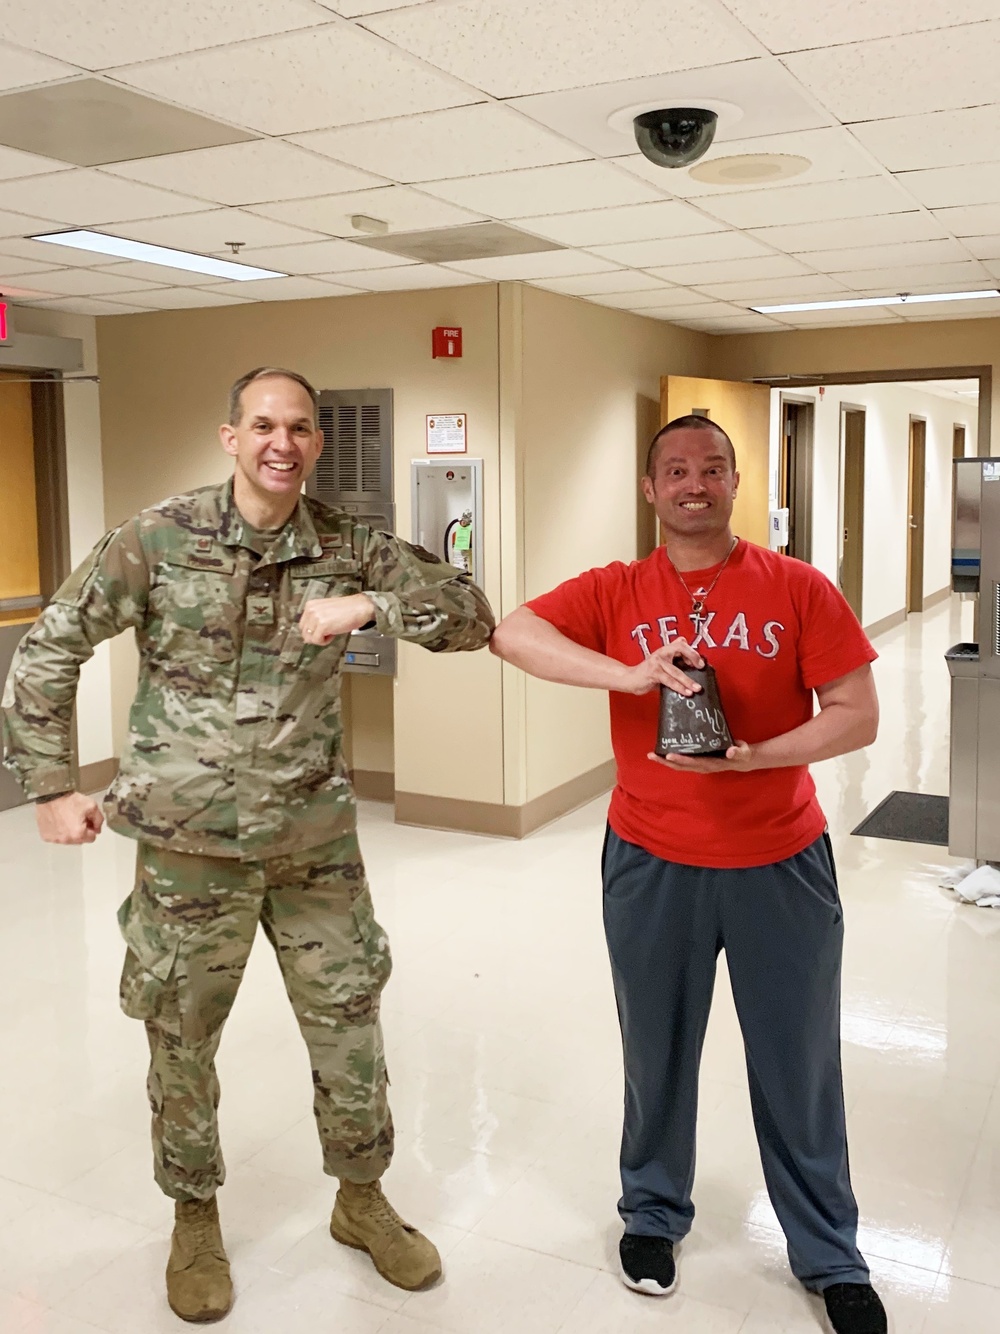 Moments of joy still ring out at Army hospital